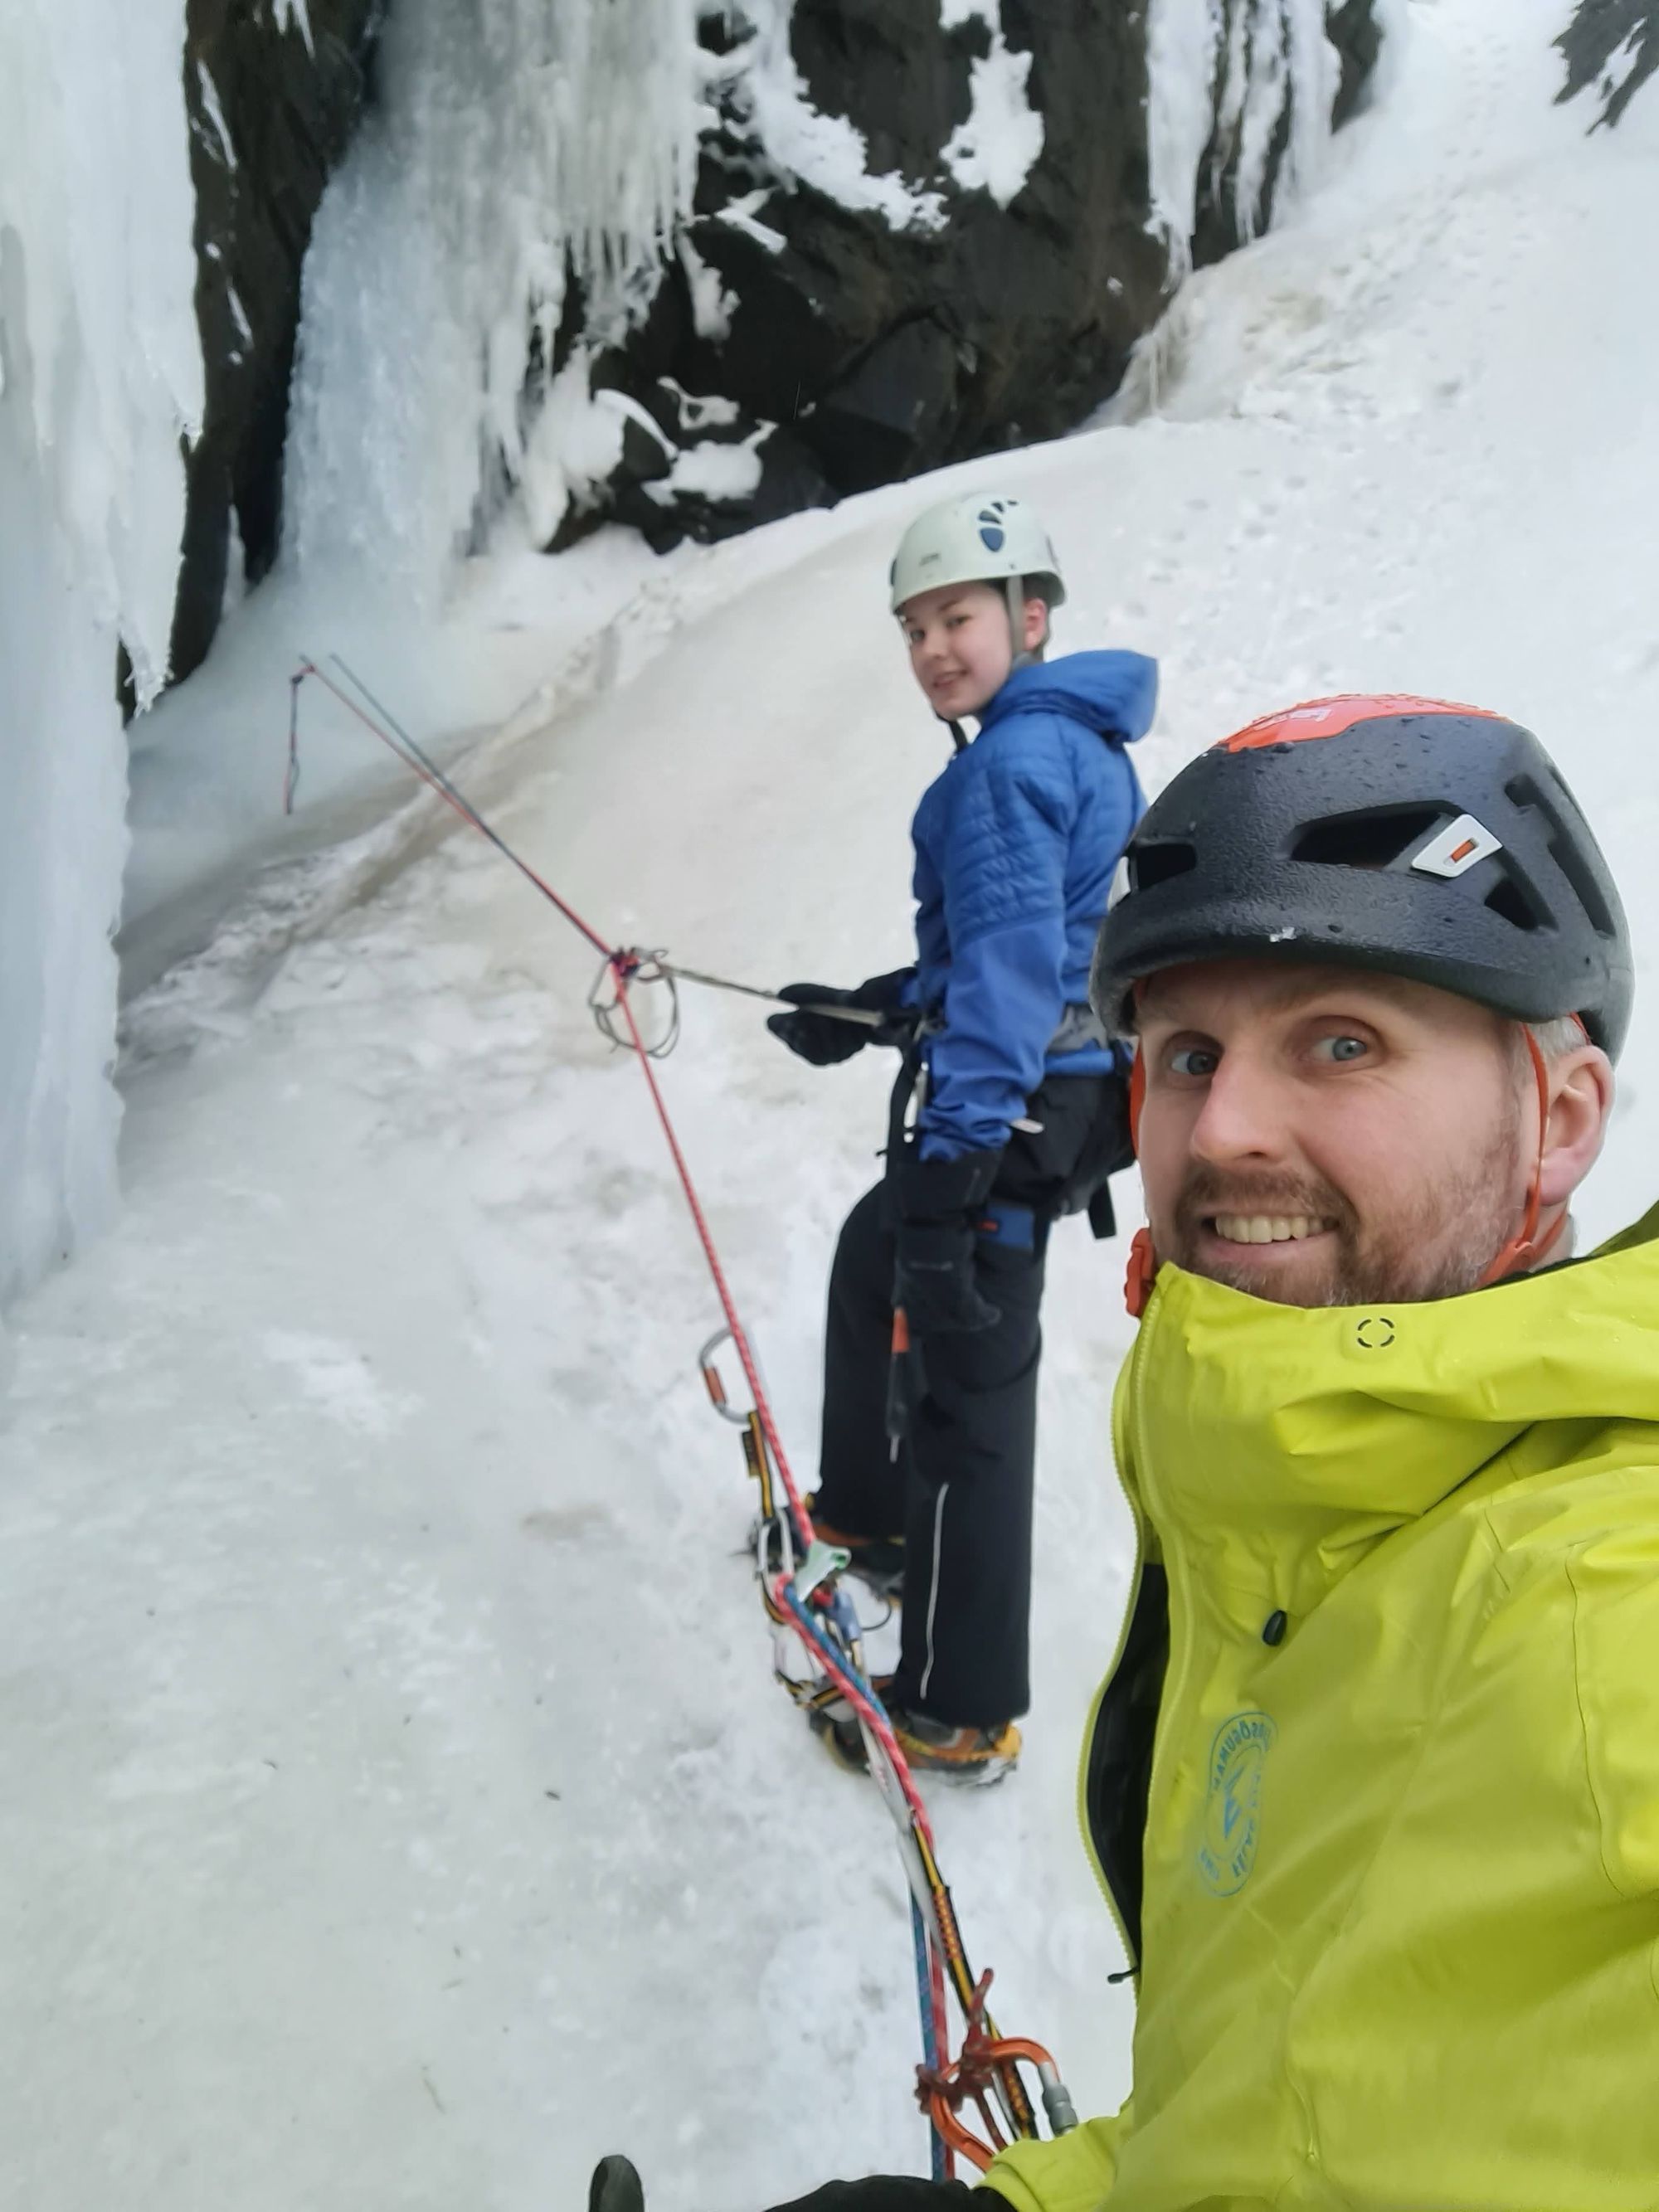 A man and a teenager roped up and ice climbing in Iceland